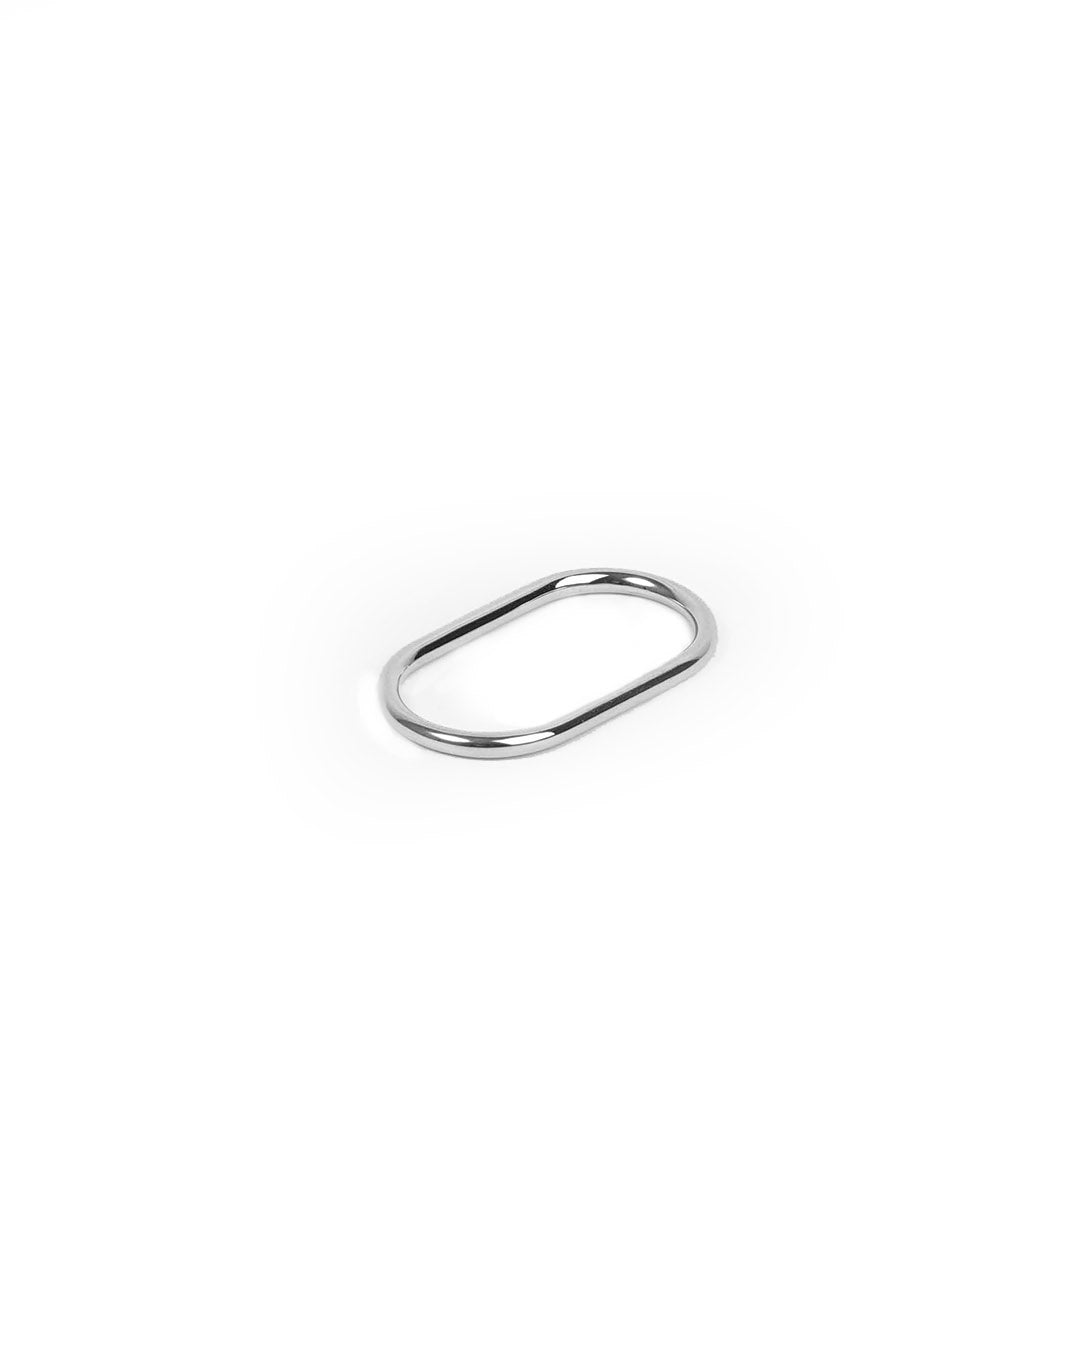 Handmade Double Ring Form - Silver - NEEO